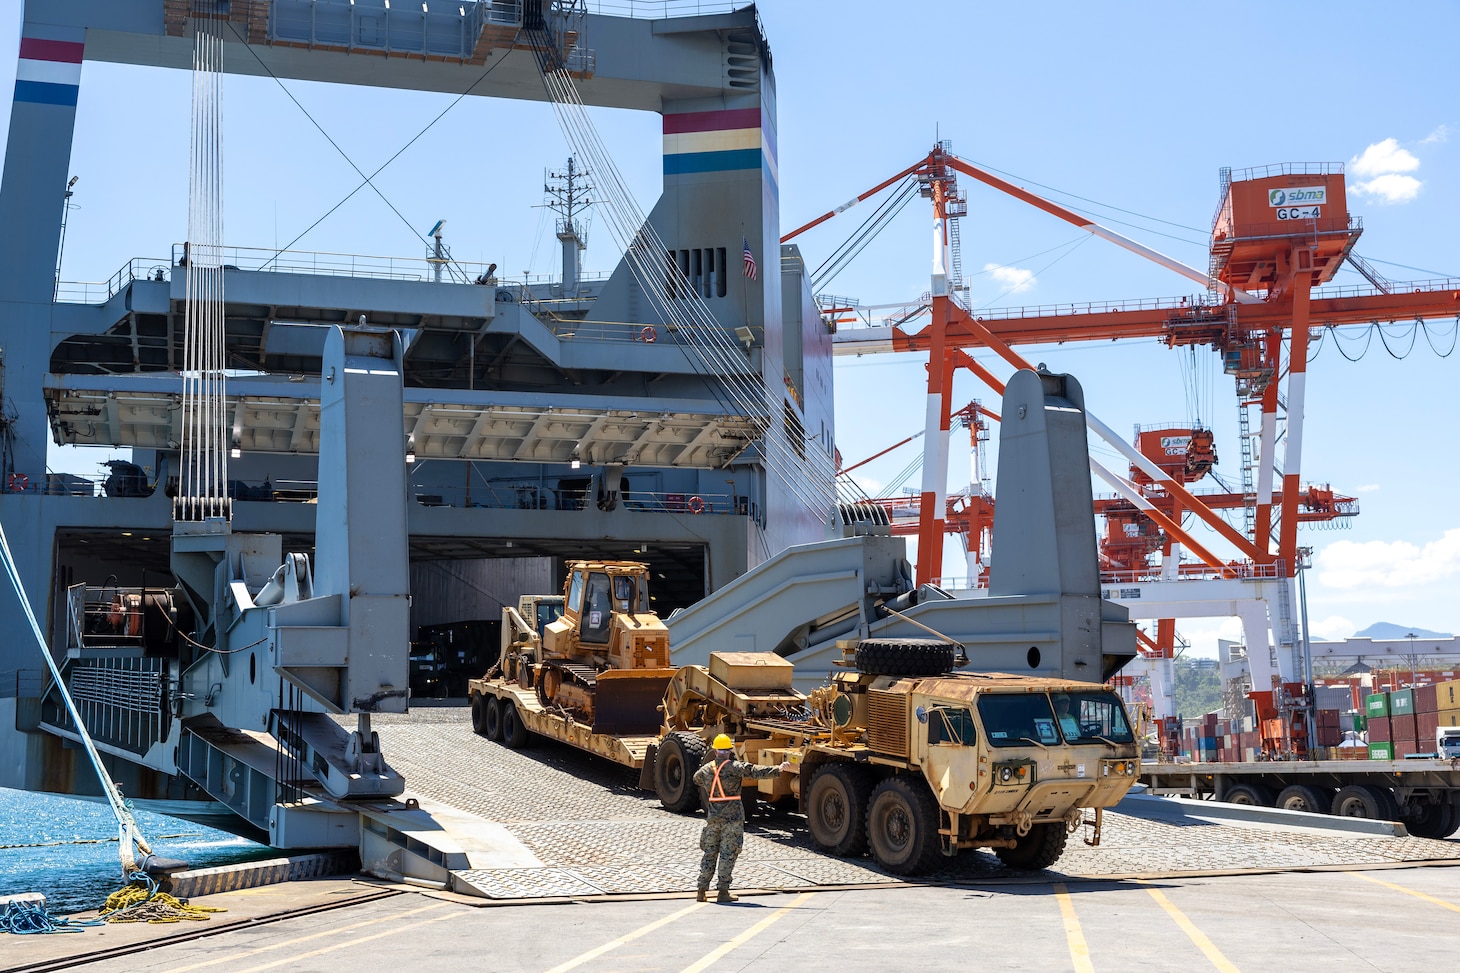 A military vehicle is driven out of Military Sealift Command chartered ship MV Cape Horn (T-AKR 5068) during an offload for exercise Balikatan 2024 at the New Container Terminal, Subic Bay, Philippines, April 15. Balikatan is a longstanding annual exercise between the Armed Forces of the Philippines and the U.S. military designed to strengthen bilateral capabilities, interoperability, trust, and cooperation. (U.S. Navy photo by Grady T. Fontana)